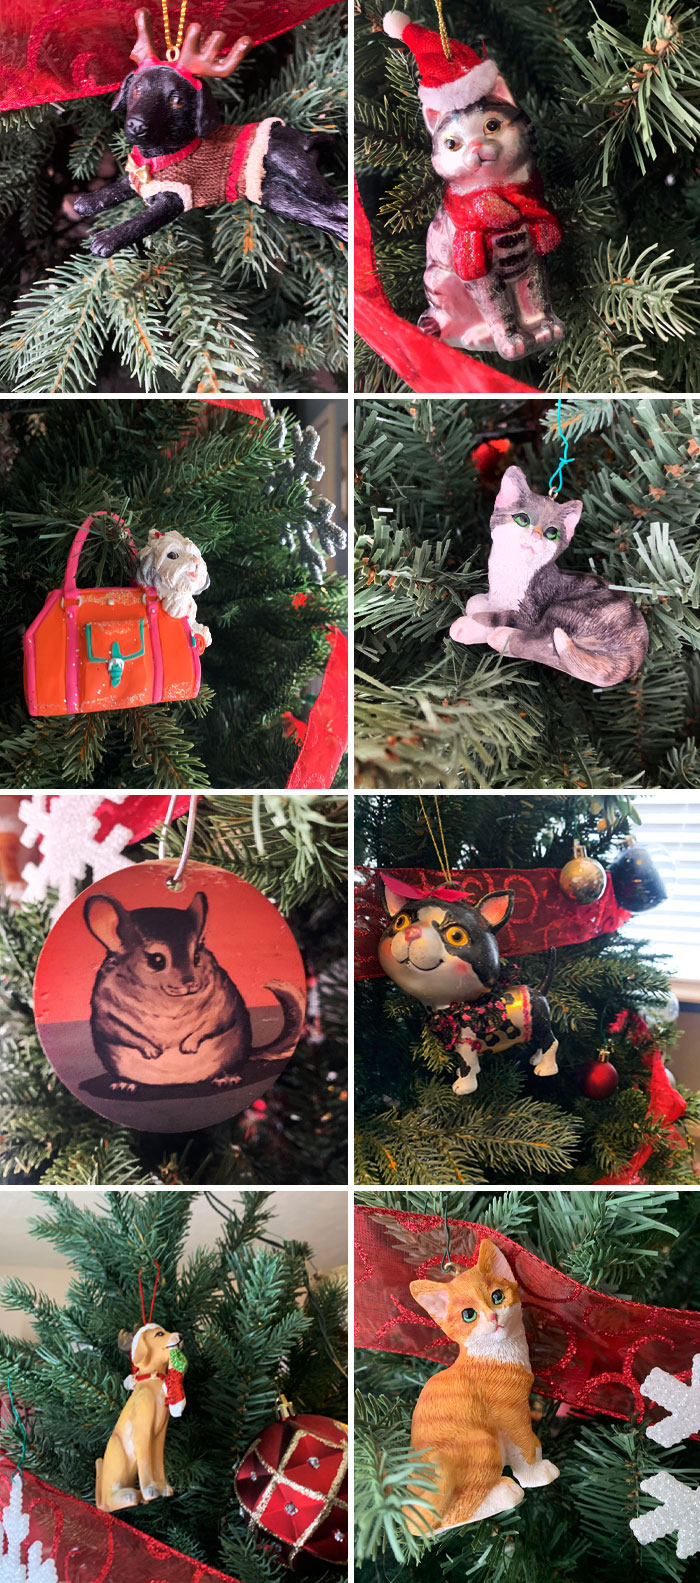 My Family Has Tree Ornaments For Pets We Have Had In The Past 10 Years. My Mom Says It's So They Can Still Join Us On The Holidays